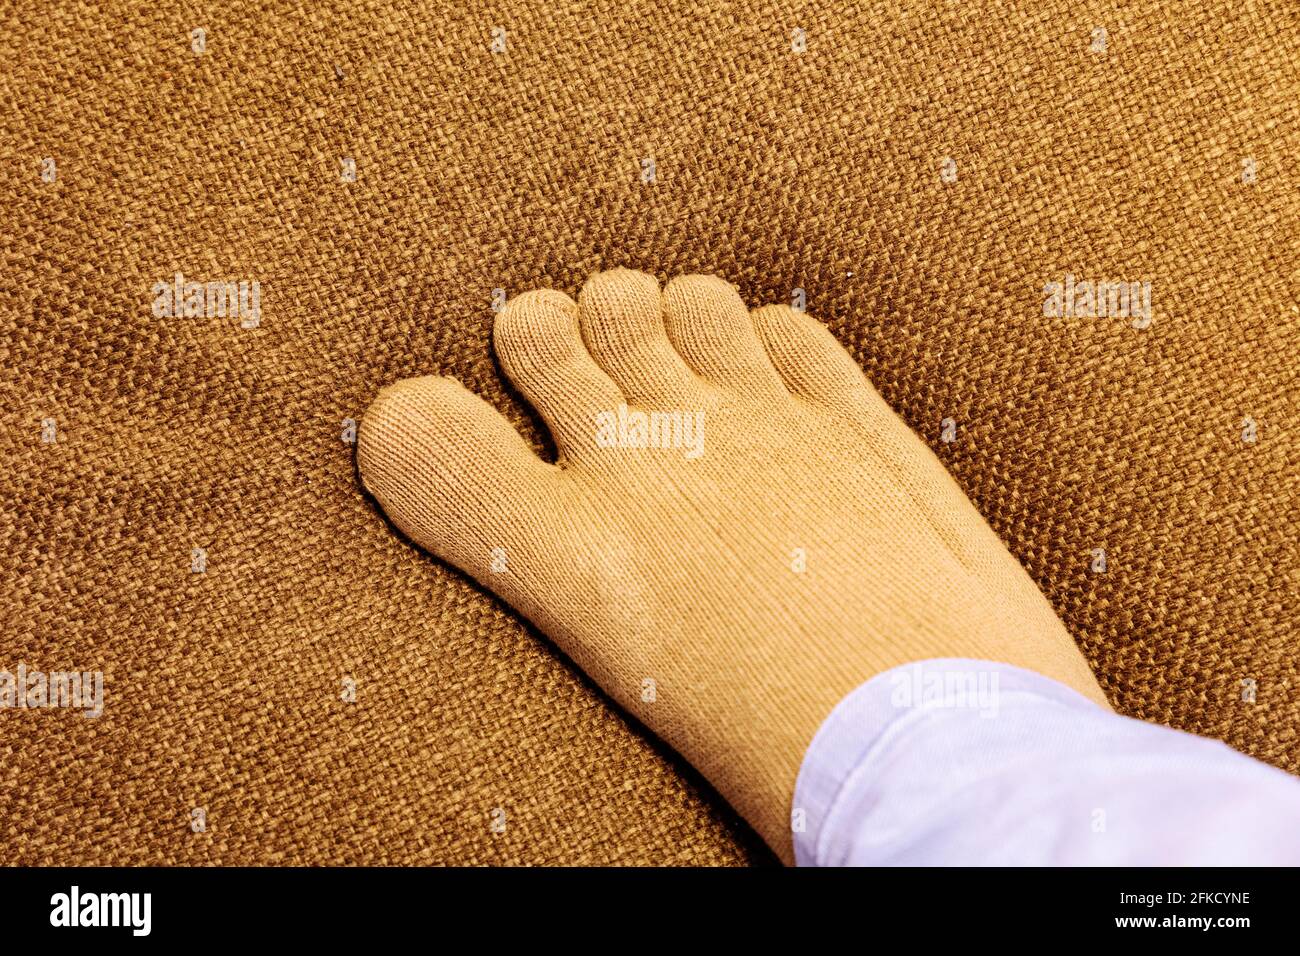 Healthy finger socks wearing foot on sofa in top view close up image. Stock Photo